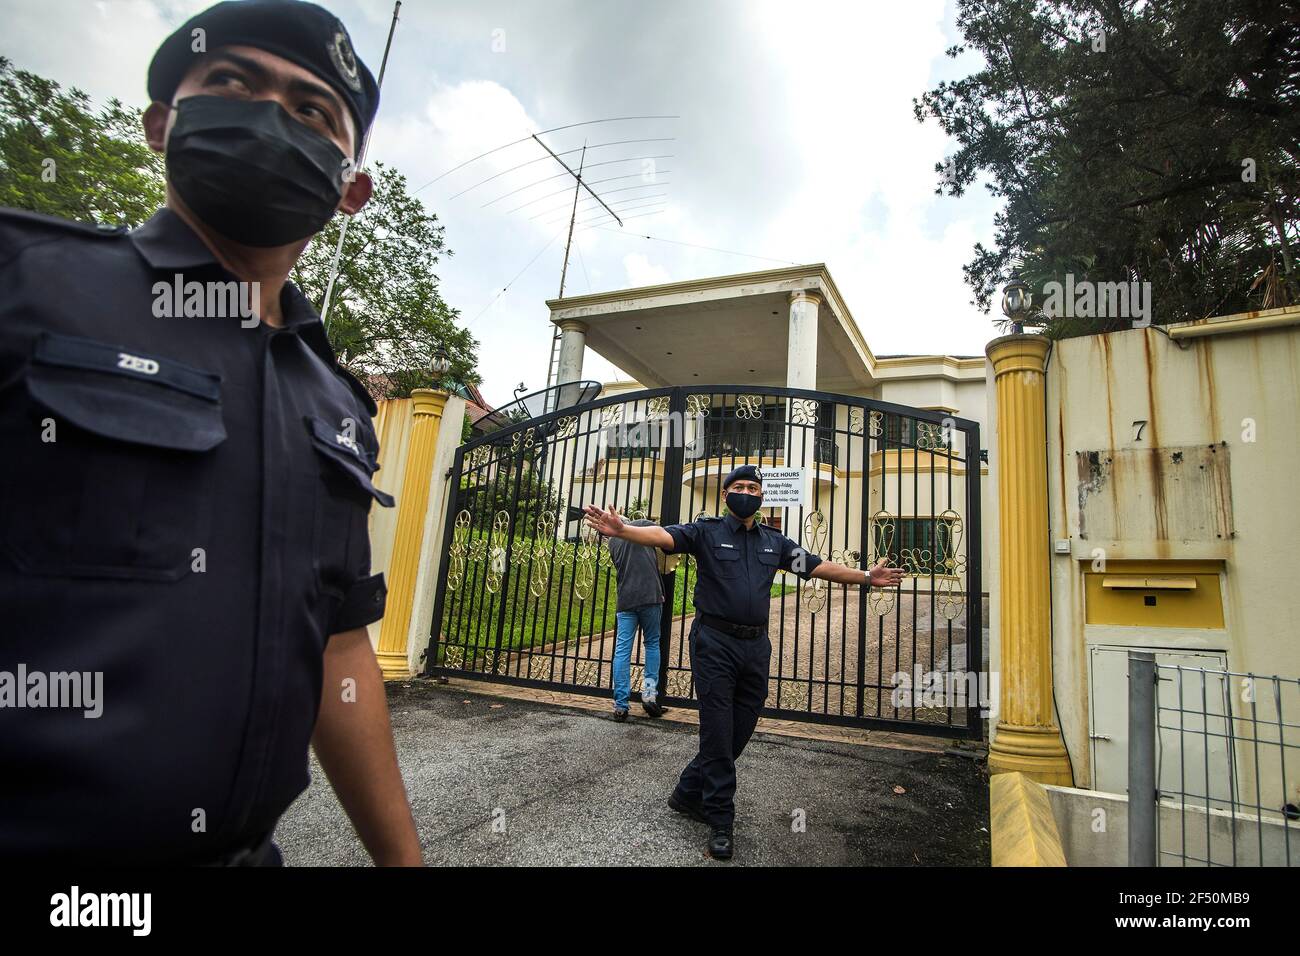 Royal Malaysian Police officers stand on guard at the entrance of the North Korea embassy in Kuala Lumpur.North Korean staff left the country's embassy in Bukit Damansara, Malaysia after Pyongyang cut diplomatic ties with Kuala Lumpur for extraditing a DPRK national to the U.S. Stock Photo